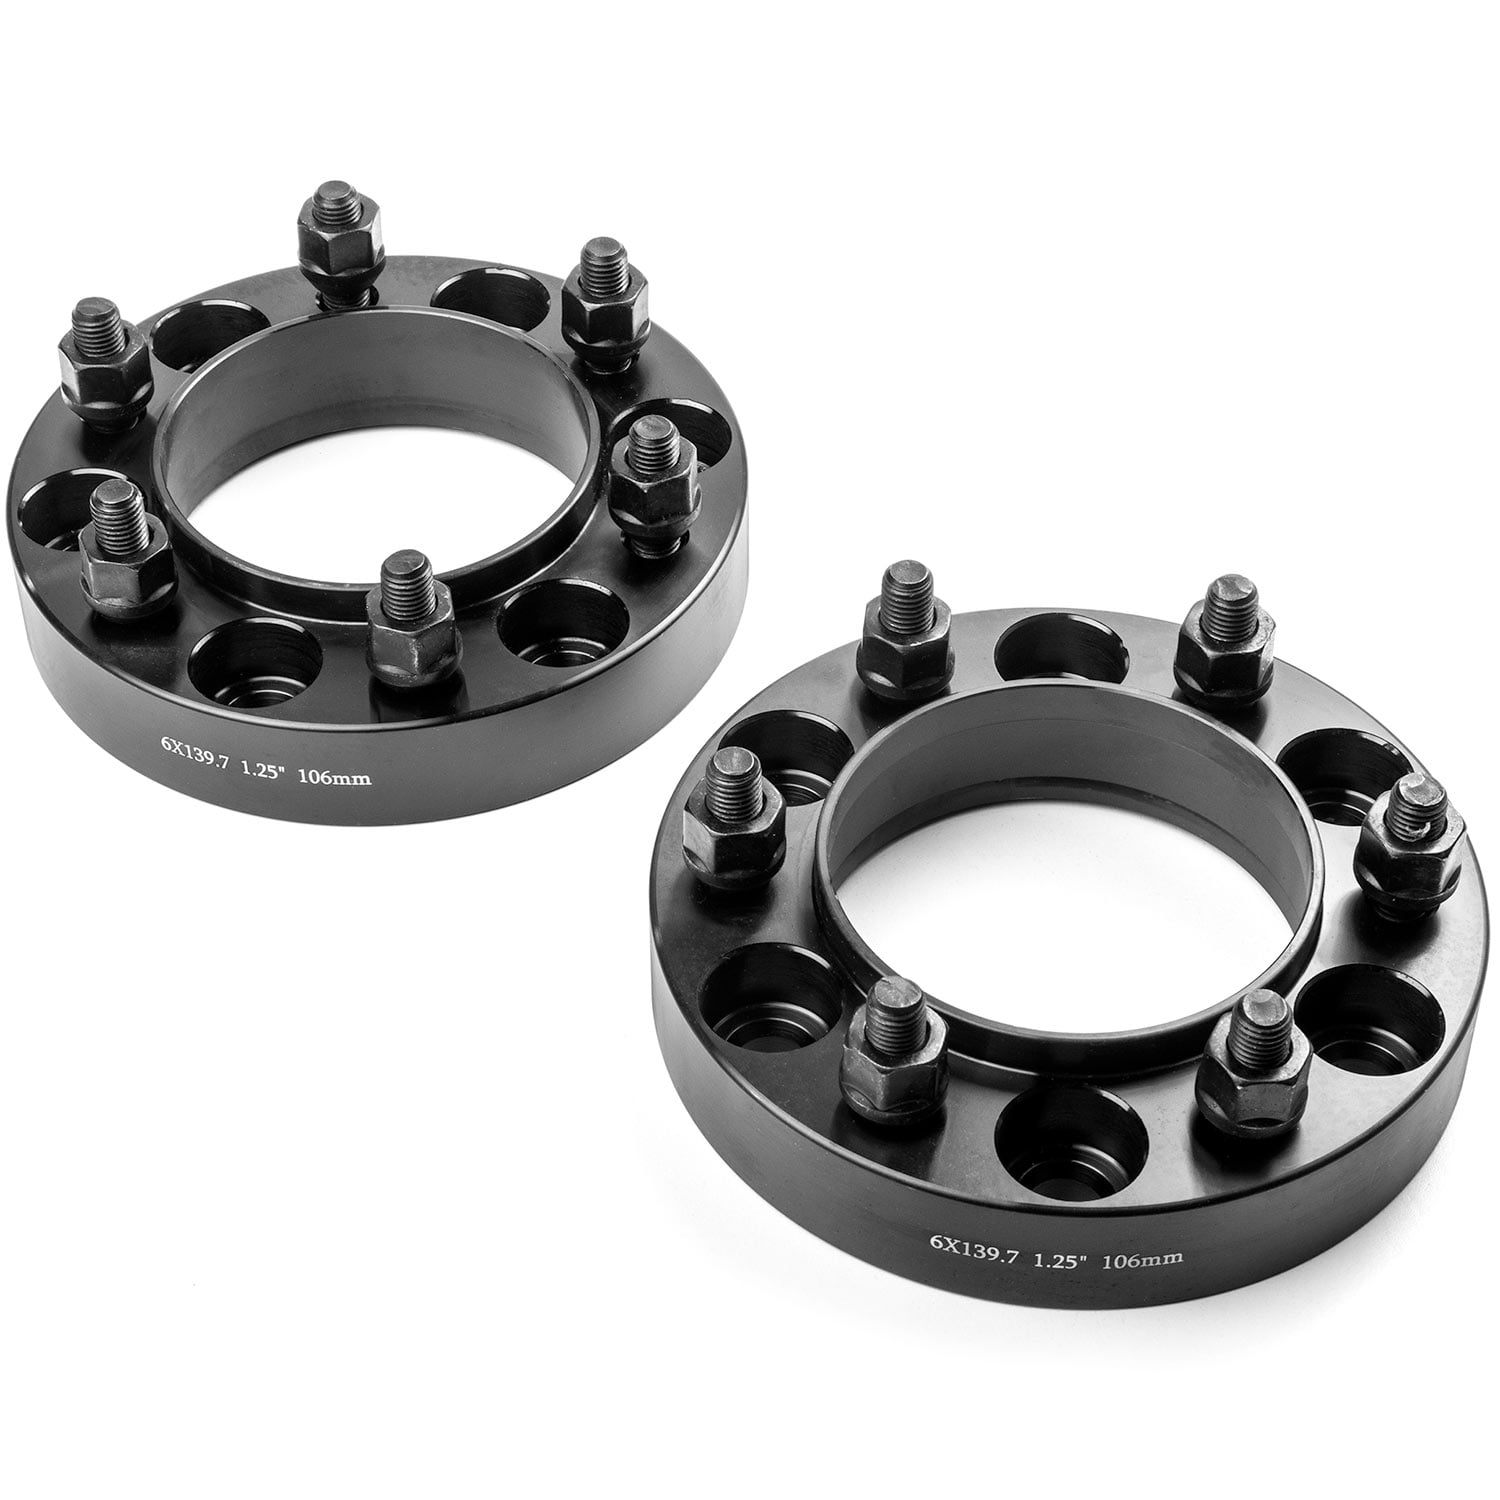 4X 1.25" 6x5.5 6x139.7 12x1.5 Wheel Spacers 106mm For Toyota Tacoma 2001-2016 